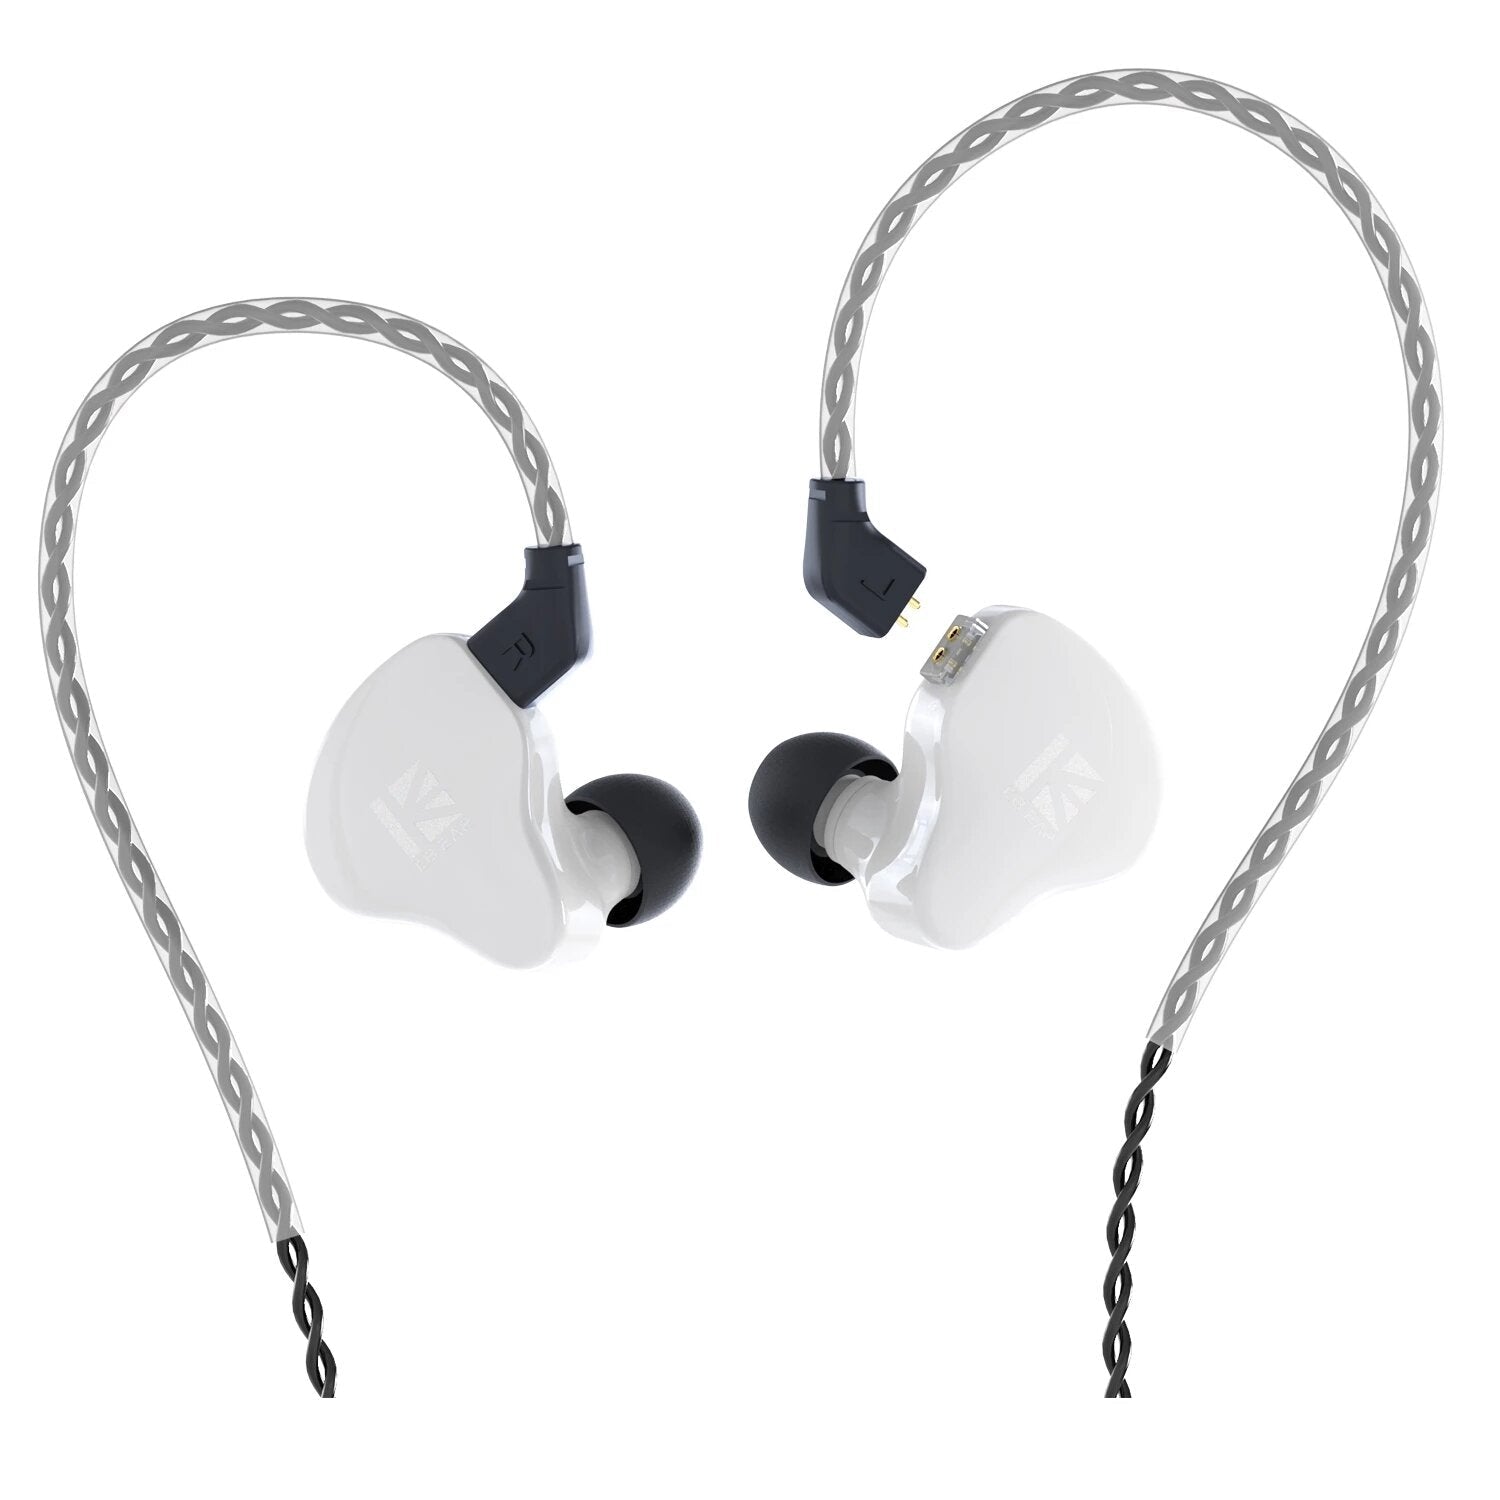 Dual Magnectic Circuit Dynamic In Ear Earphone Running Sport HIFI Wired Headphones With Mic Earbuds Kbear KS2 KB06